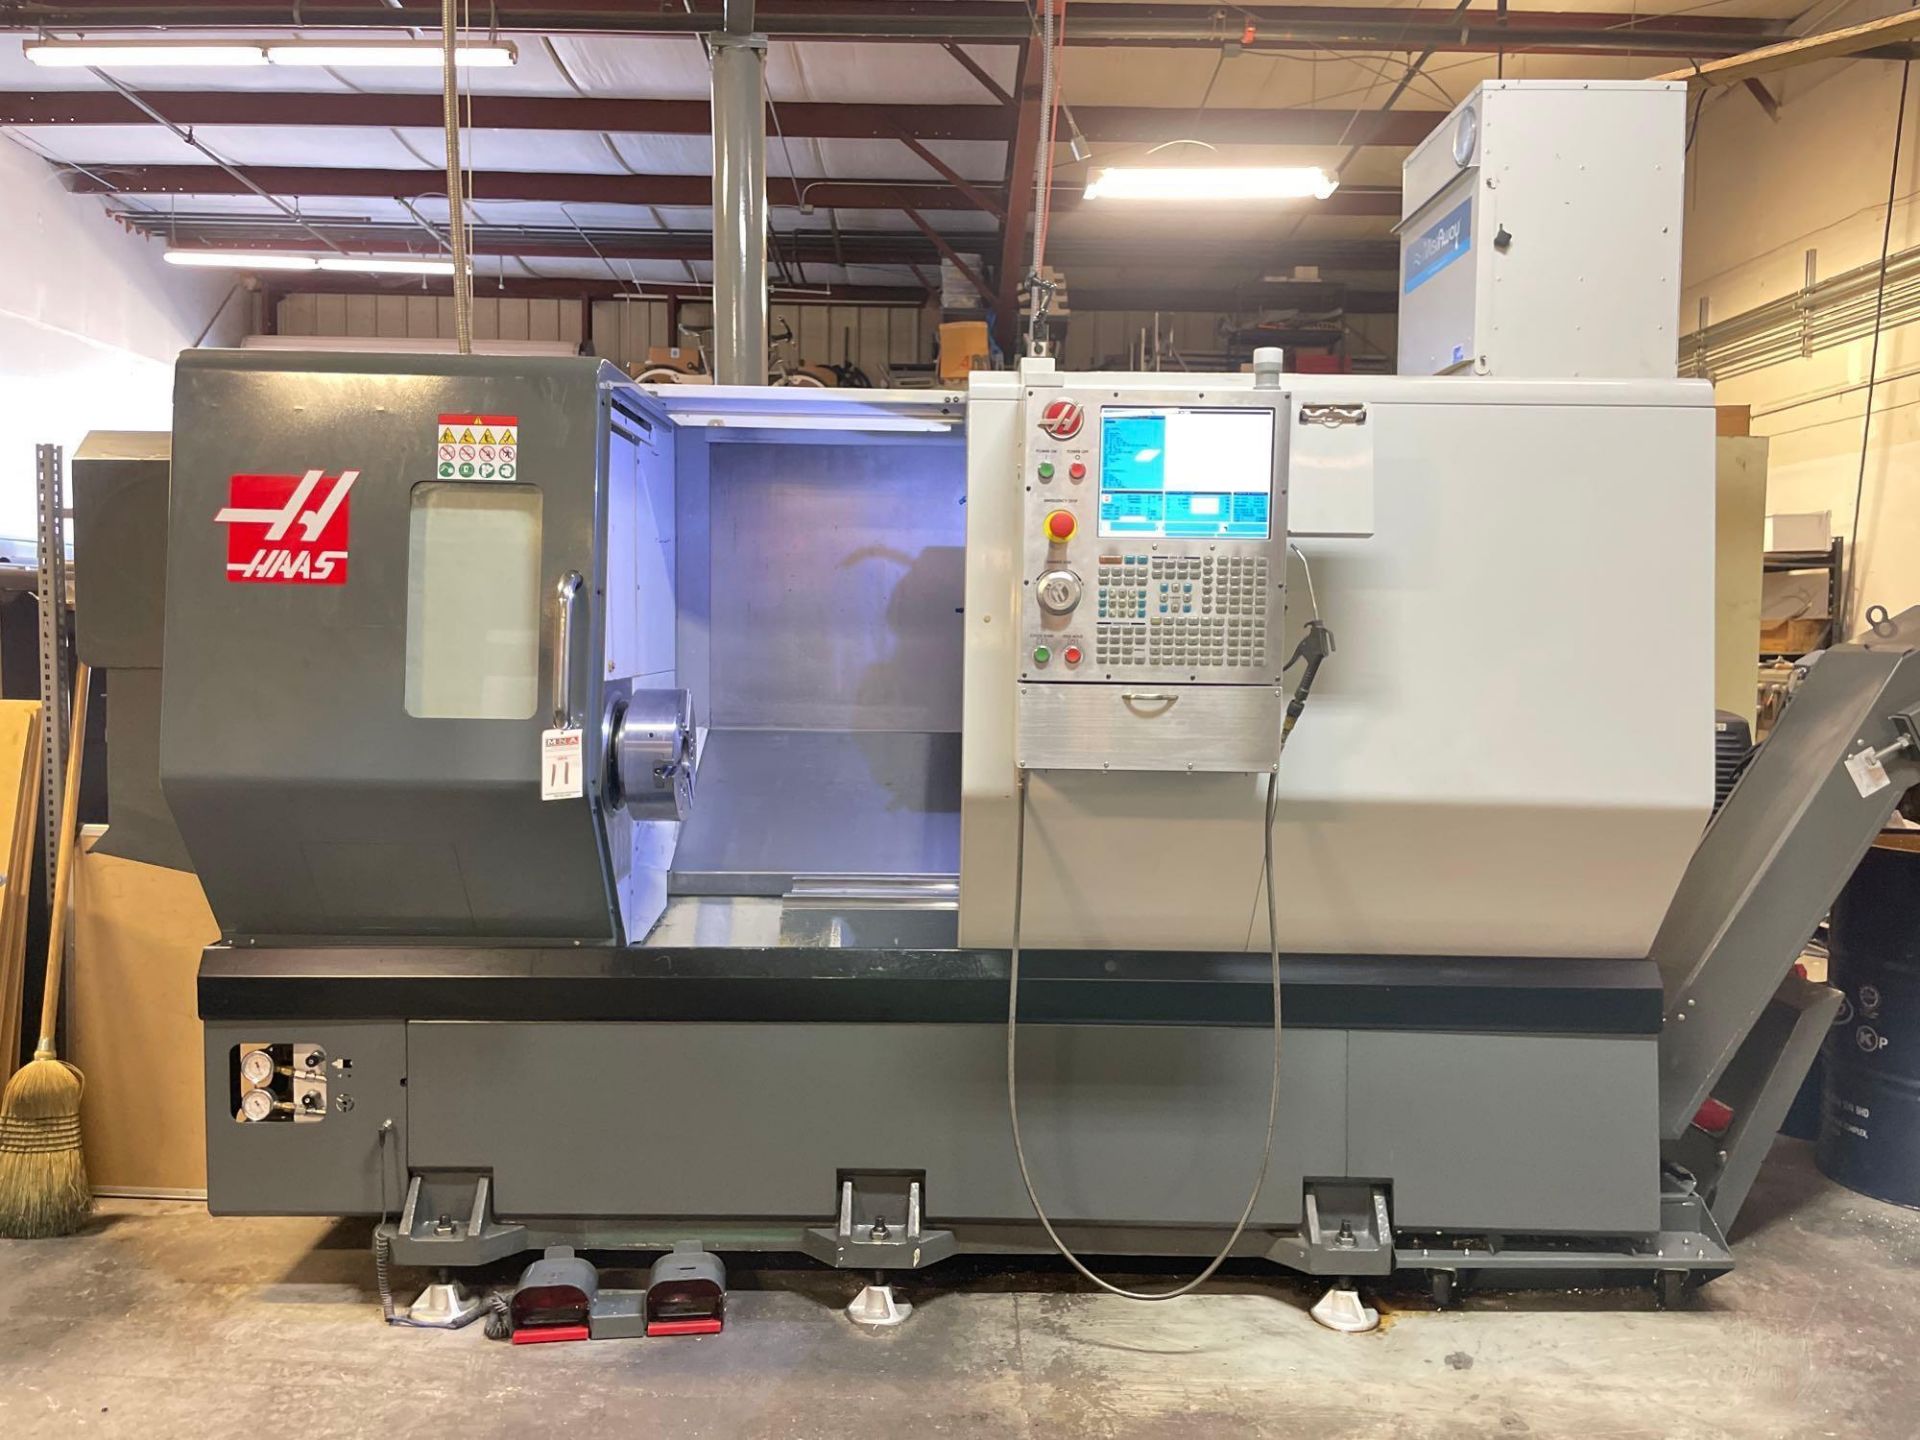 Haas ST-30 3-Axis CNC Lathe, C-Axis, 12" Hydraulic Chuck, 12 Position Turret, High Torque, New 2017